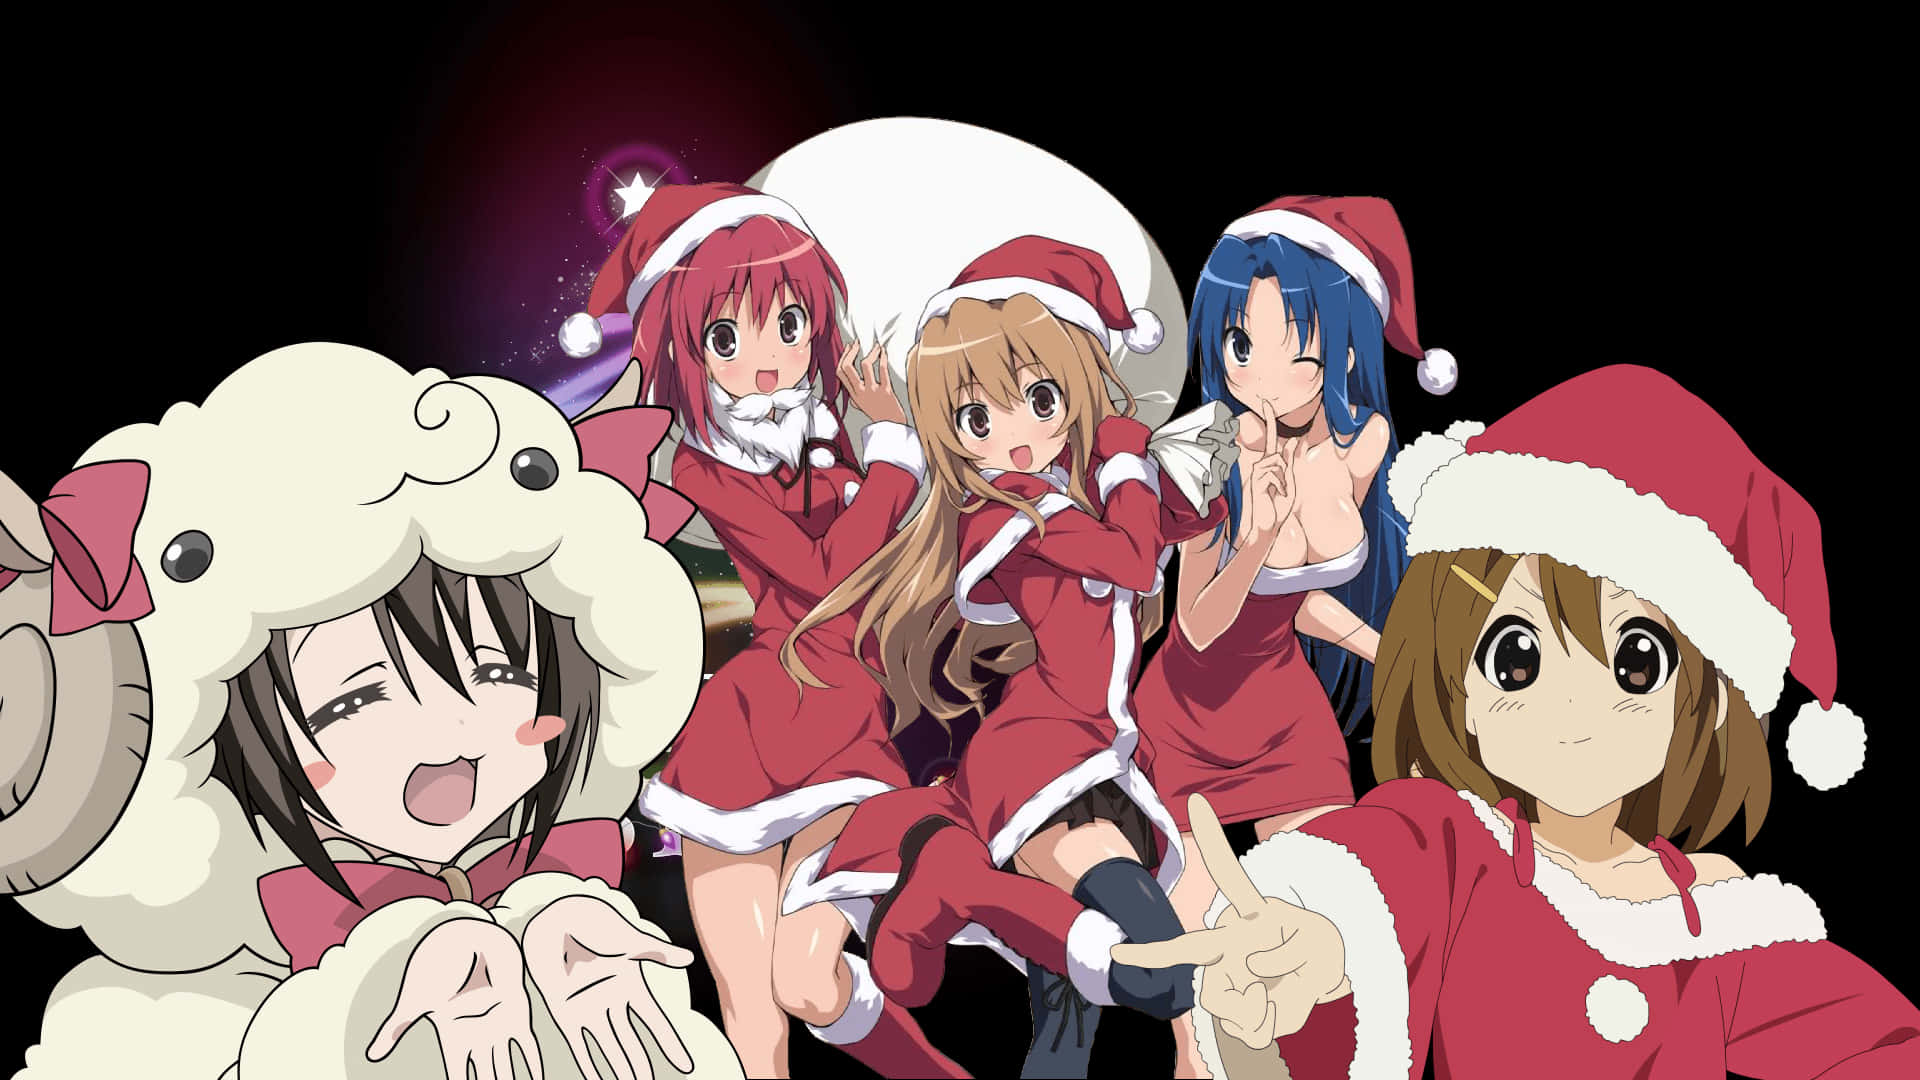 Celebrate Christmas with Your Favorite Anime Characters!